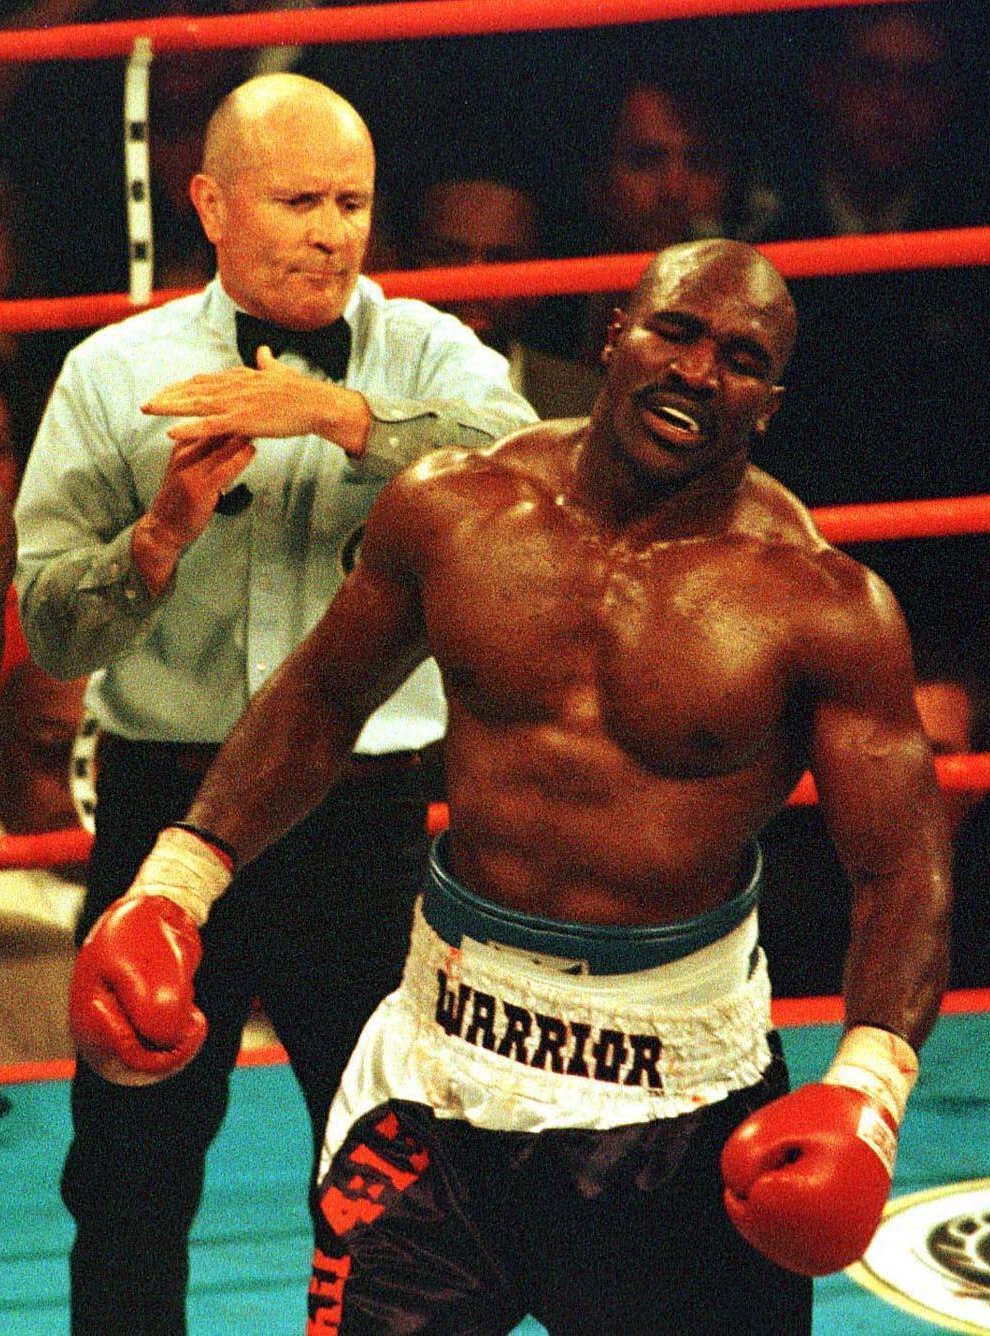 Holyfield (right) beat Tyson (left) twice back in the 1990s